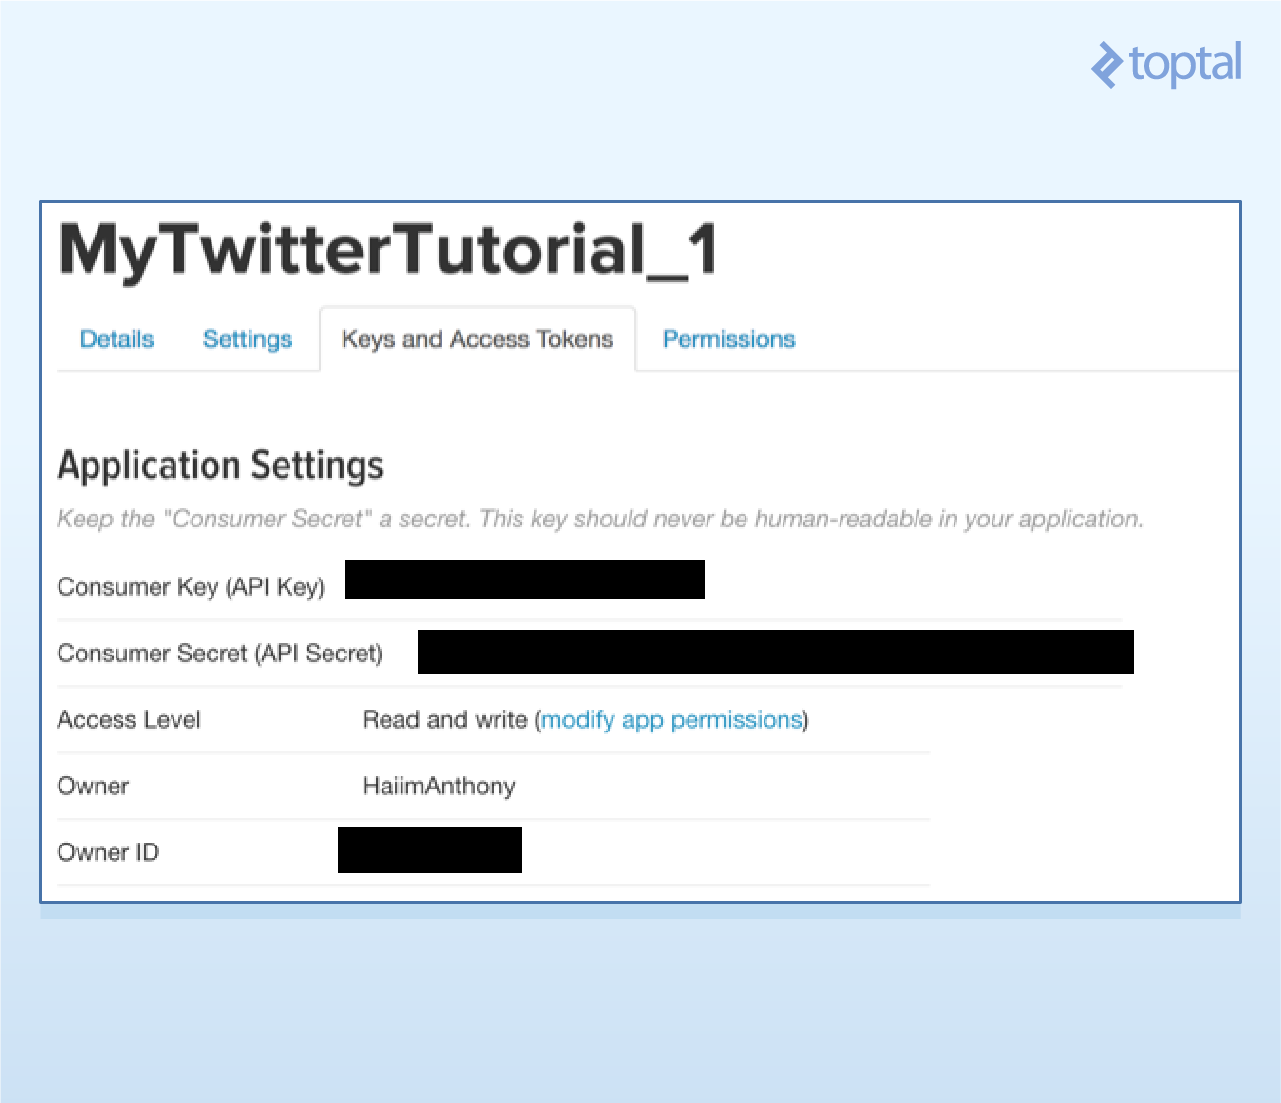 Location of the Twitter API key and secret